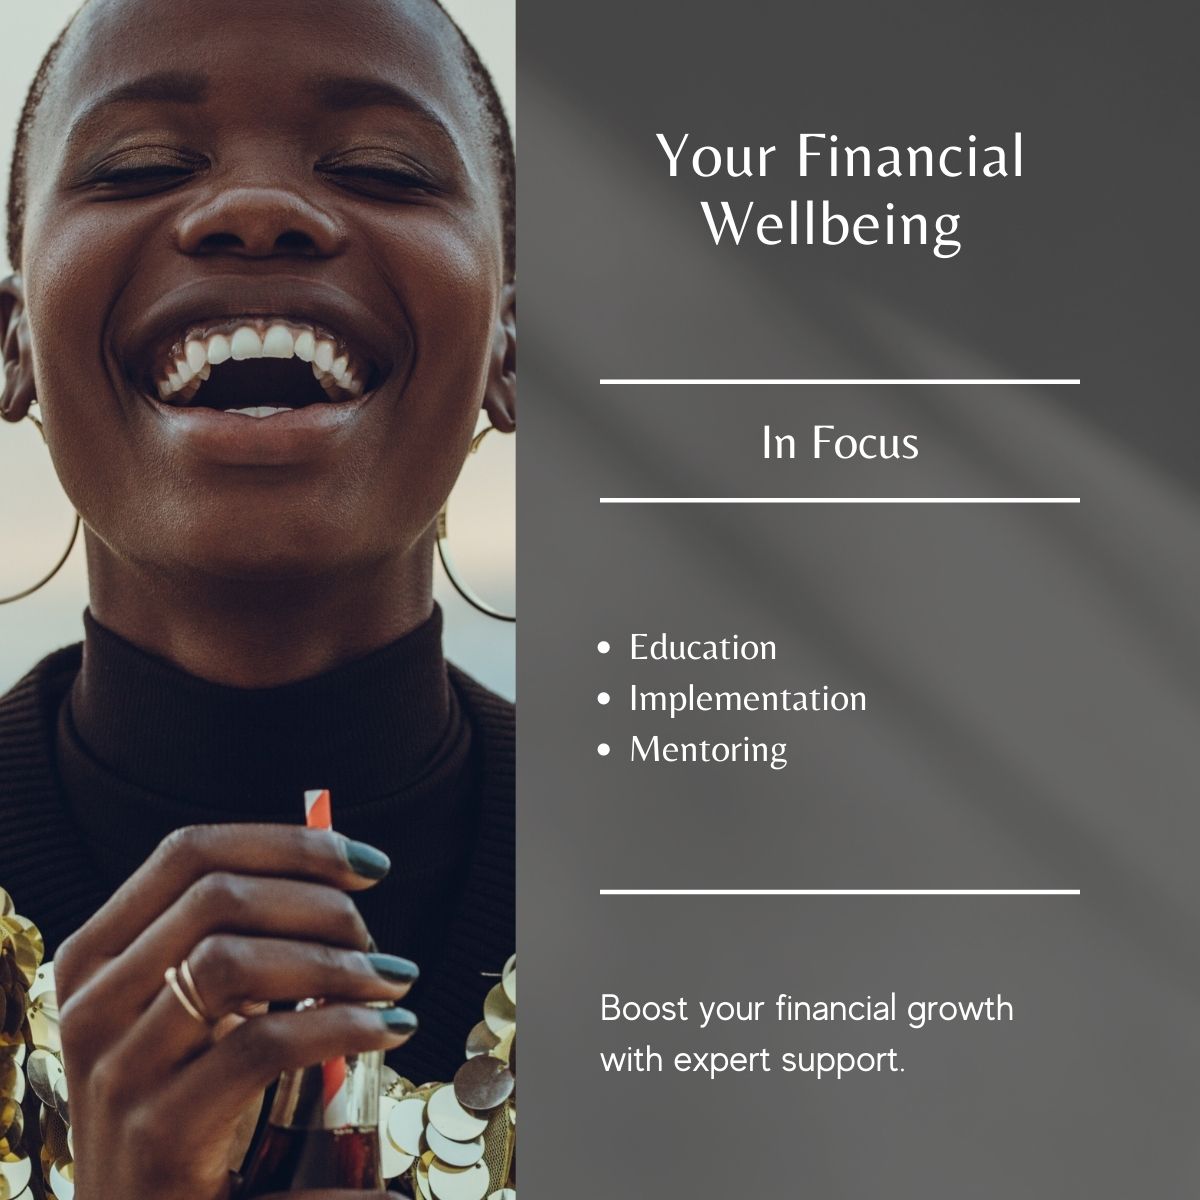 Your financial wellbeing